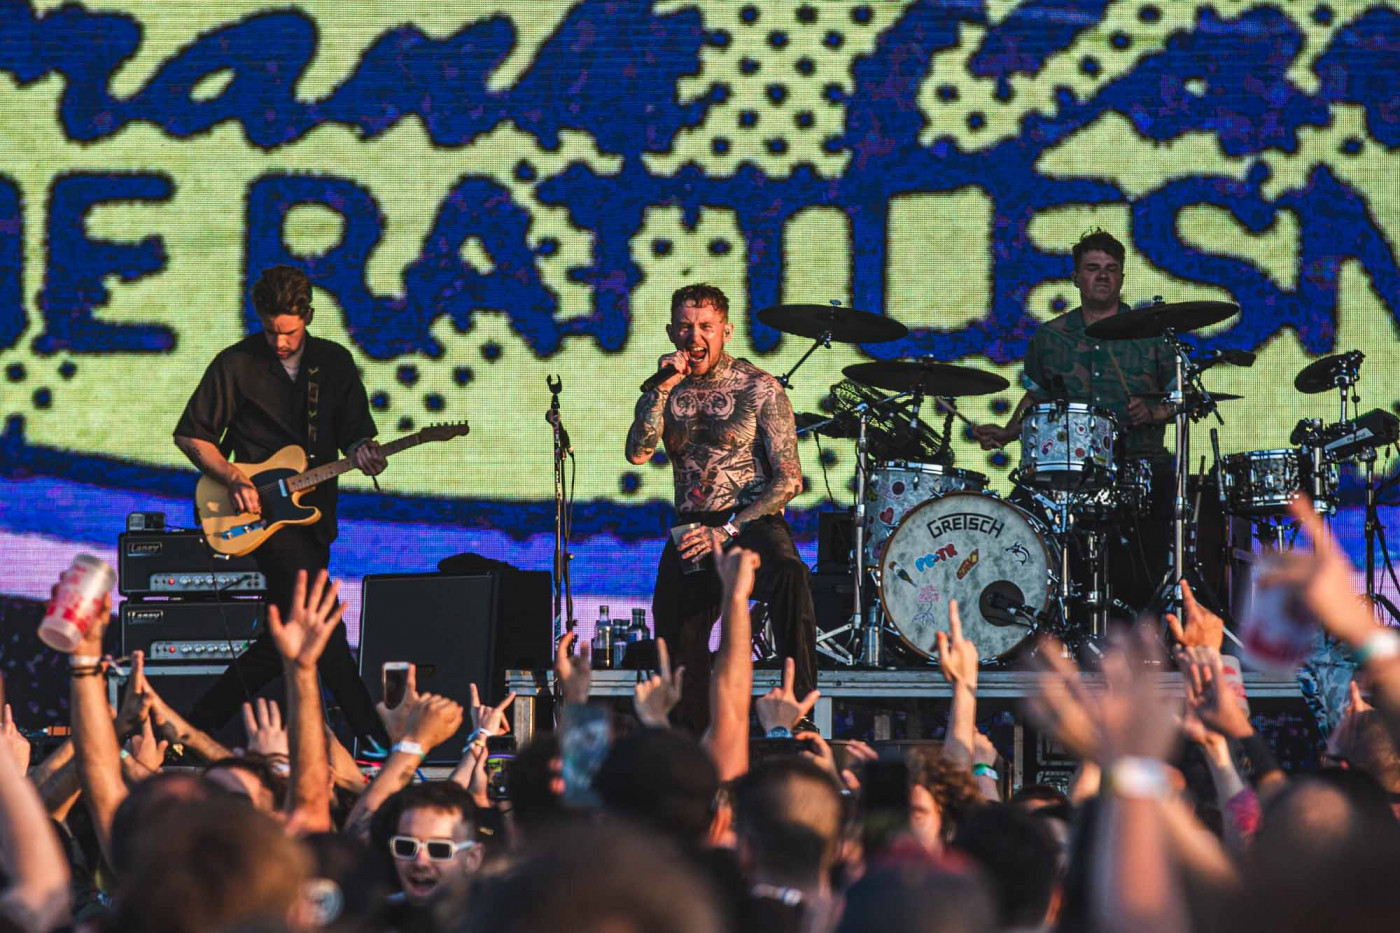 Frank Carter & The Rattlesnakes, photographed by Carrie Tang